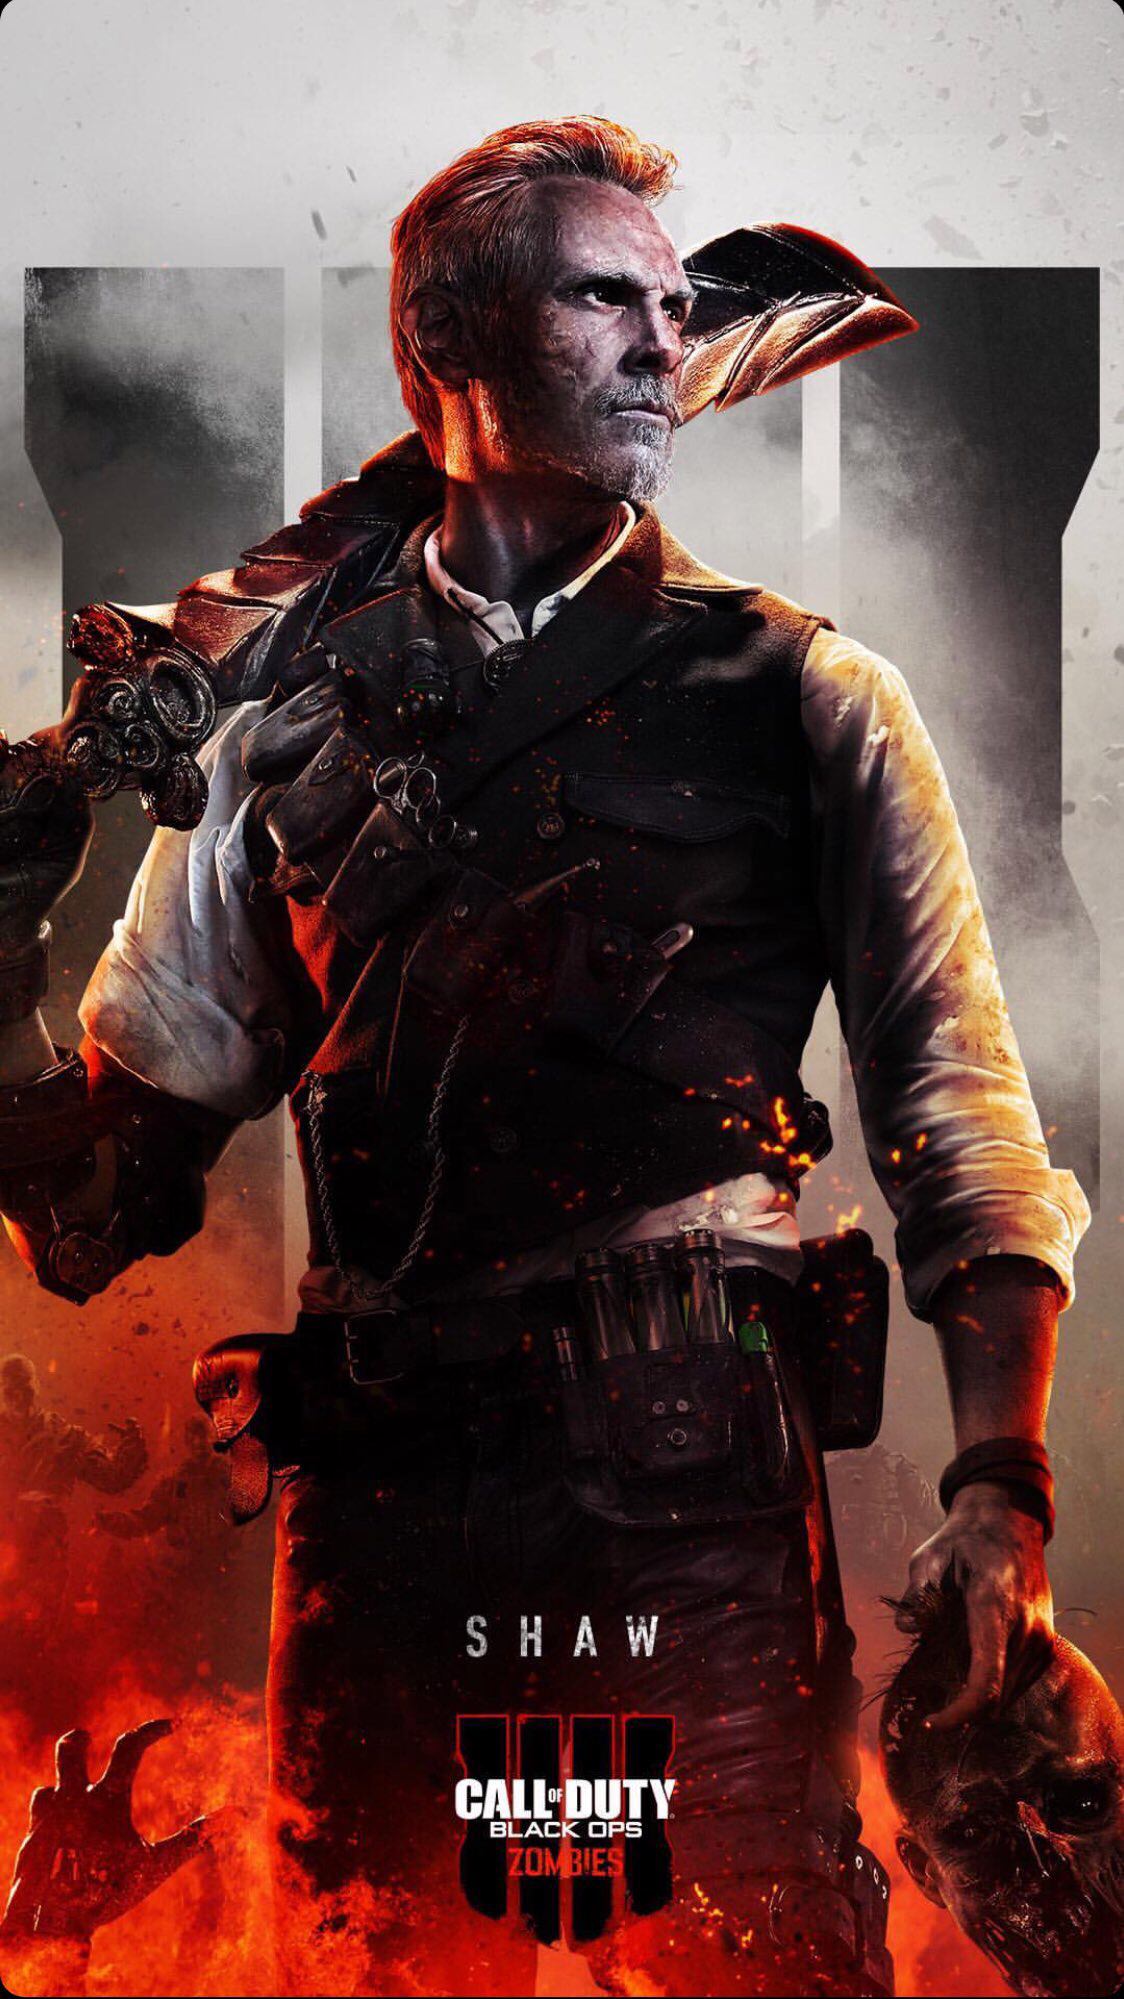 New Black Ops 4 Zombies phone wallpapers Charlie INTEL